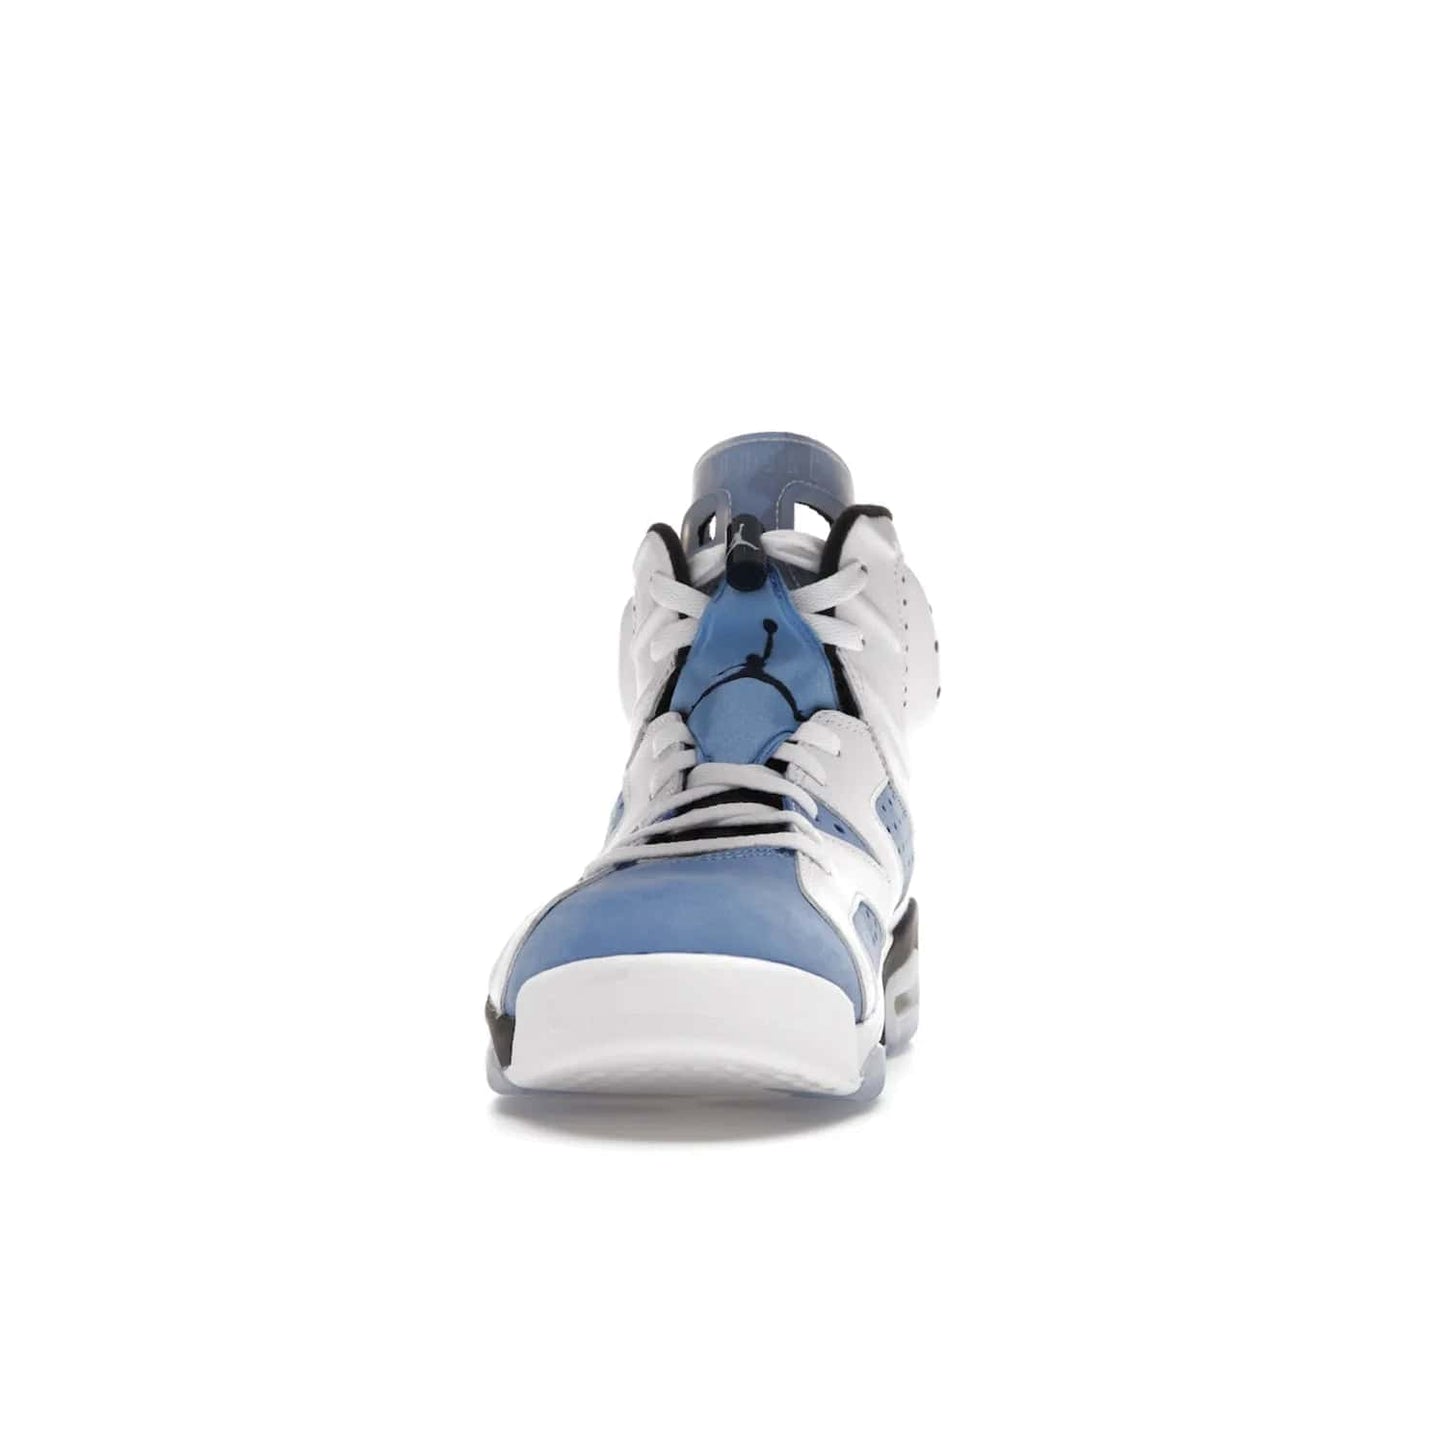 Jordan 6 Retro UNC White - Image 11 - Only at www.BallersClubKickz.com - Air Jordan 6 Retro UNC White with classic UNC colors brings nostalgia and style to a legendary silhouette. Celebrate MJ's alma mater with navy blue accents, icy semi-translucent sole and Jordan Team patch. Out March 2022 for the Sneaker Enthusiast.